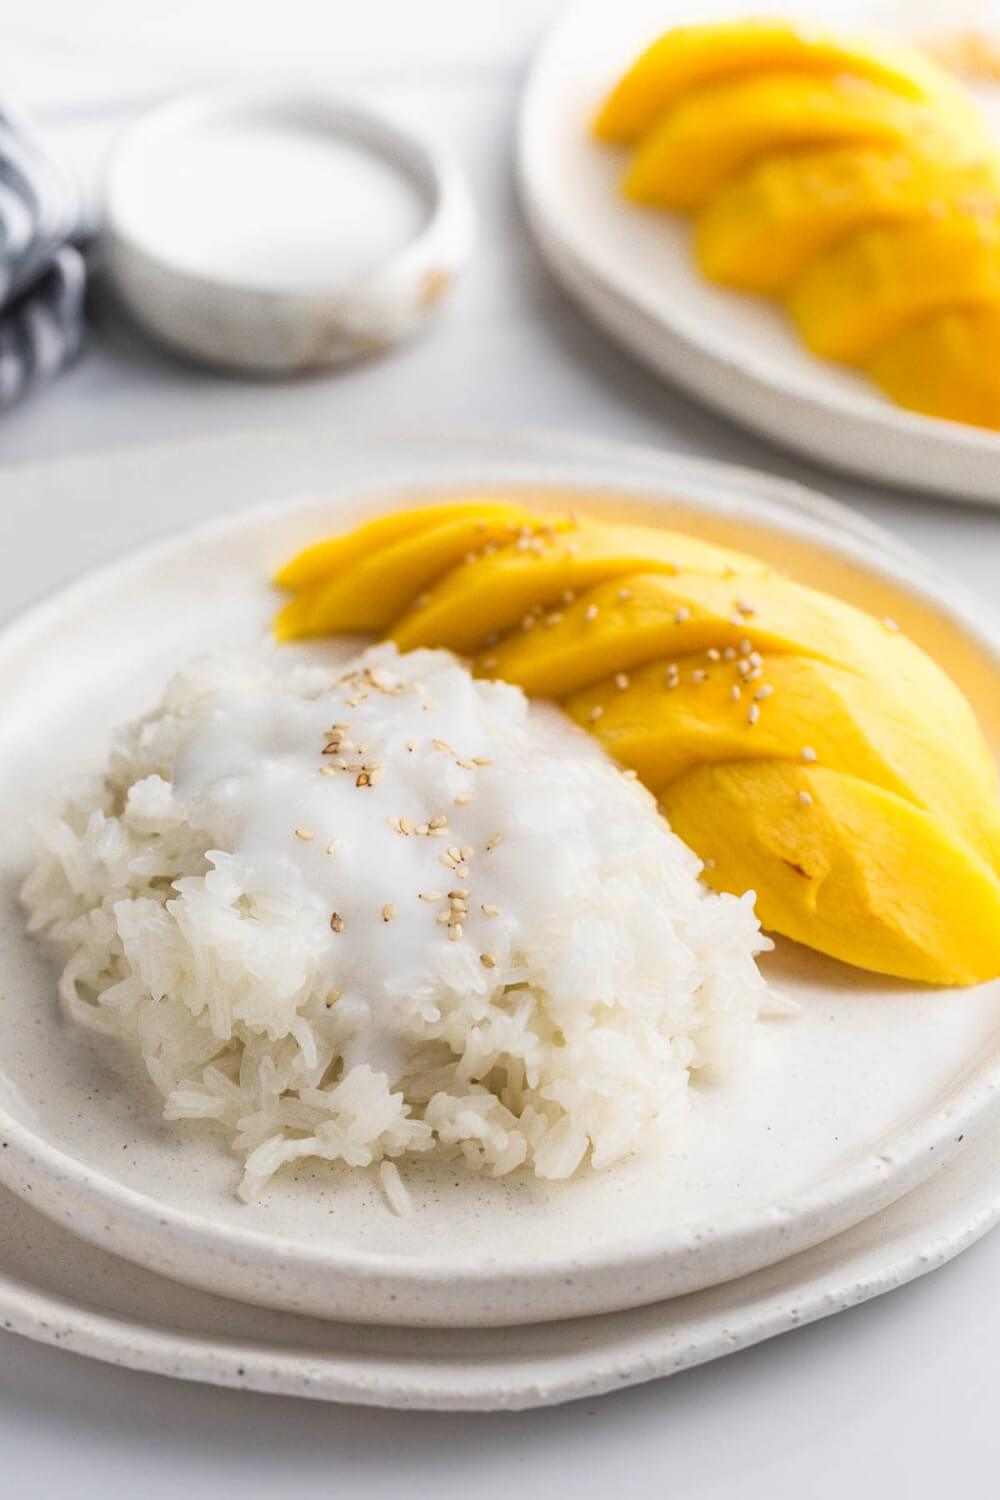 Best Mango dessert recipes by top Hawaii blog Hawaii Travel with Kids: Mango sticky rice, with fresh mango on the side on a white plate. On a white ceramic tray